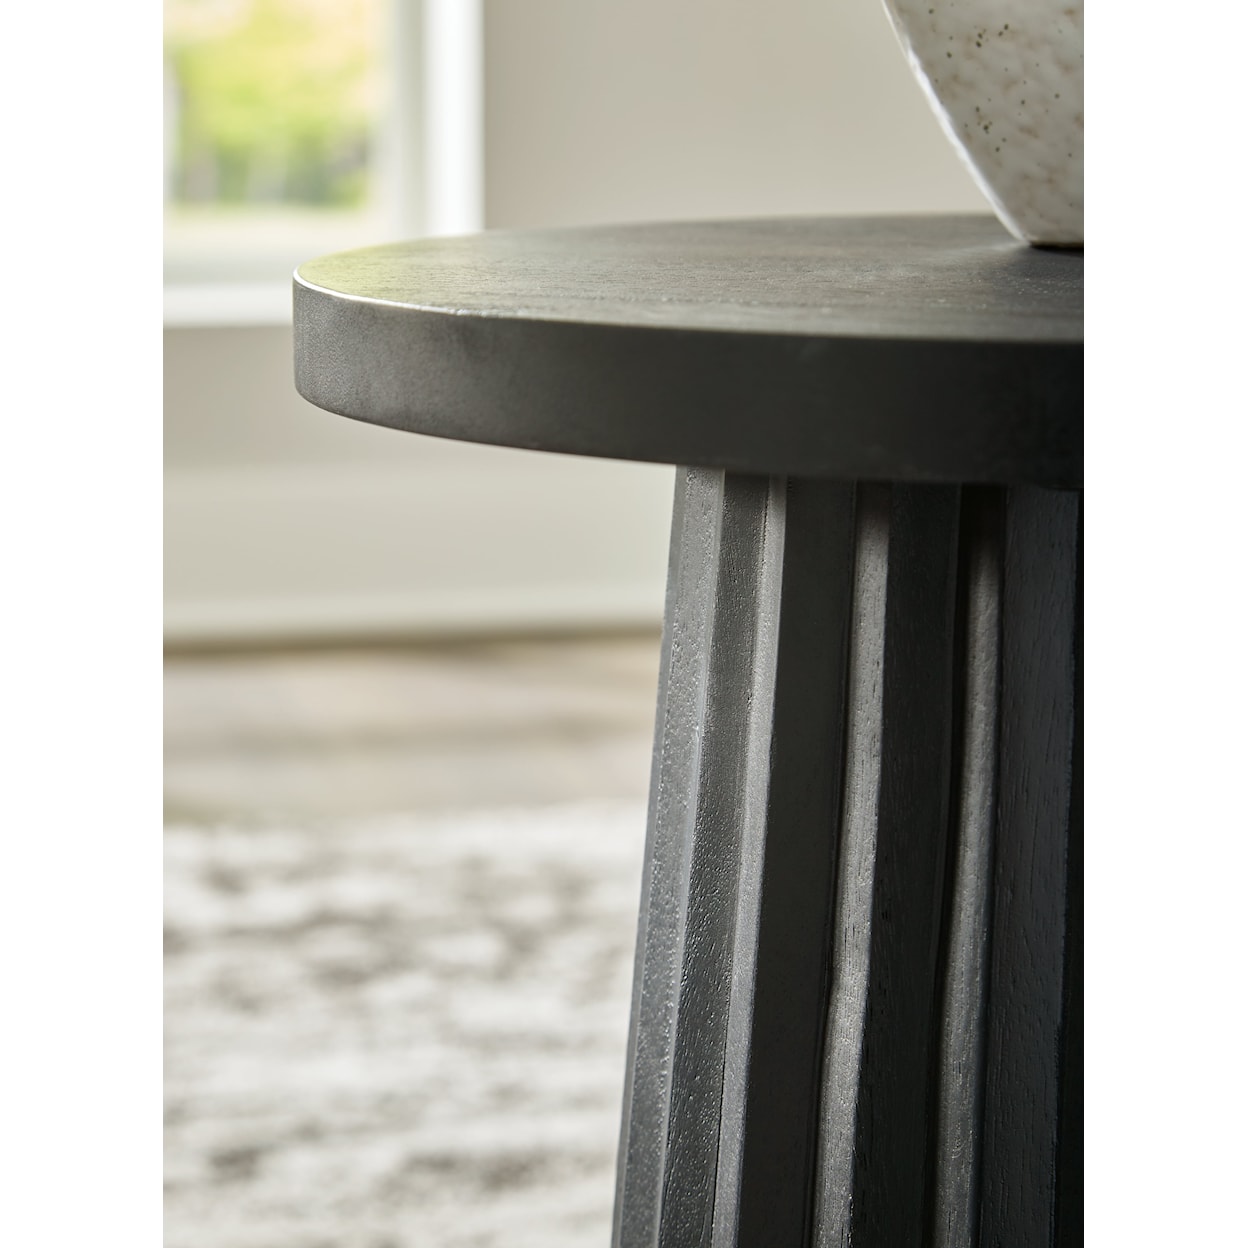 Benchcraft Ceilby Accent Table